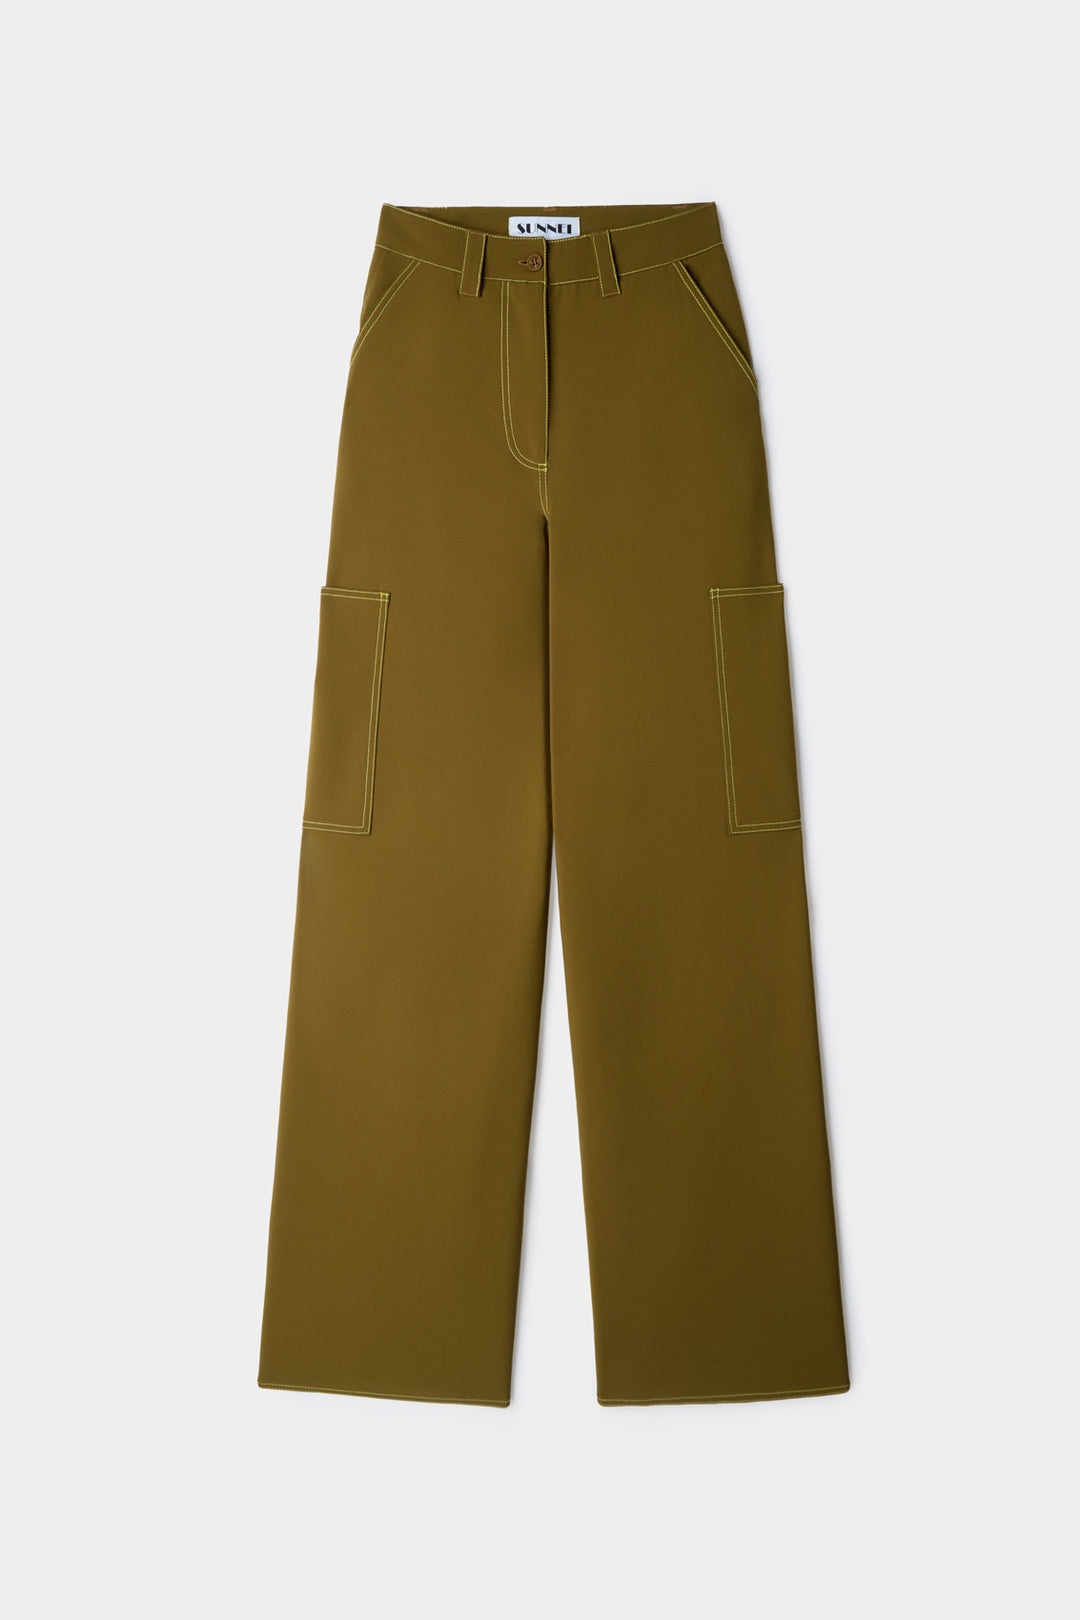 FIT LOOSE PANTS / olive green - 1